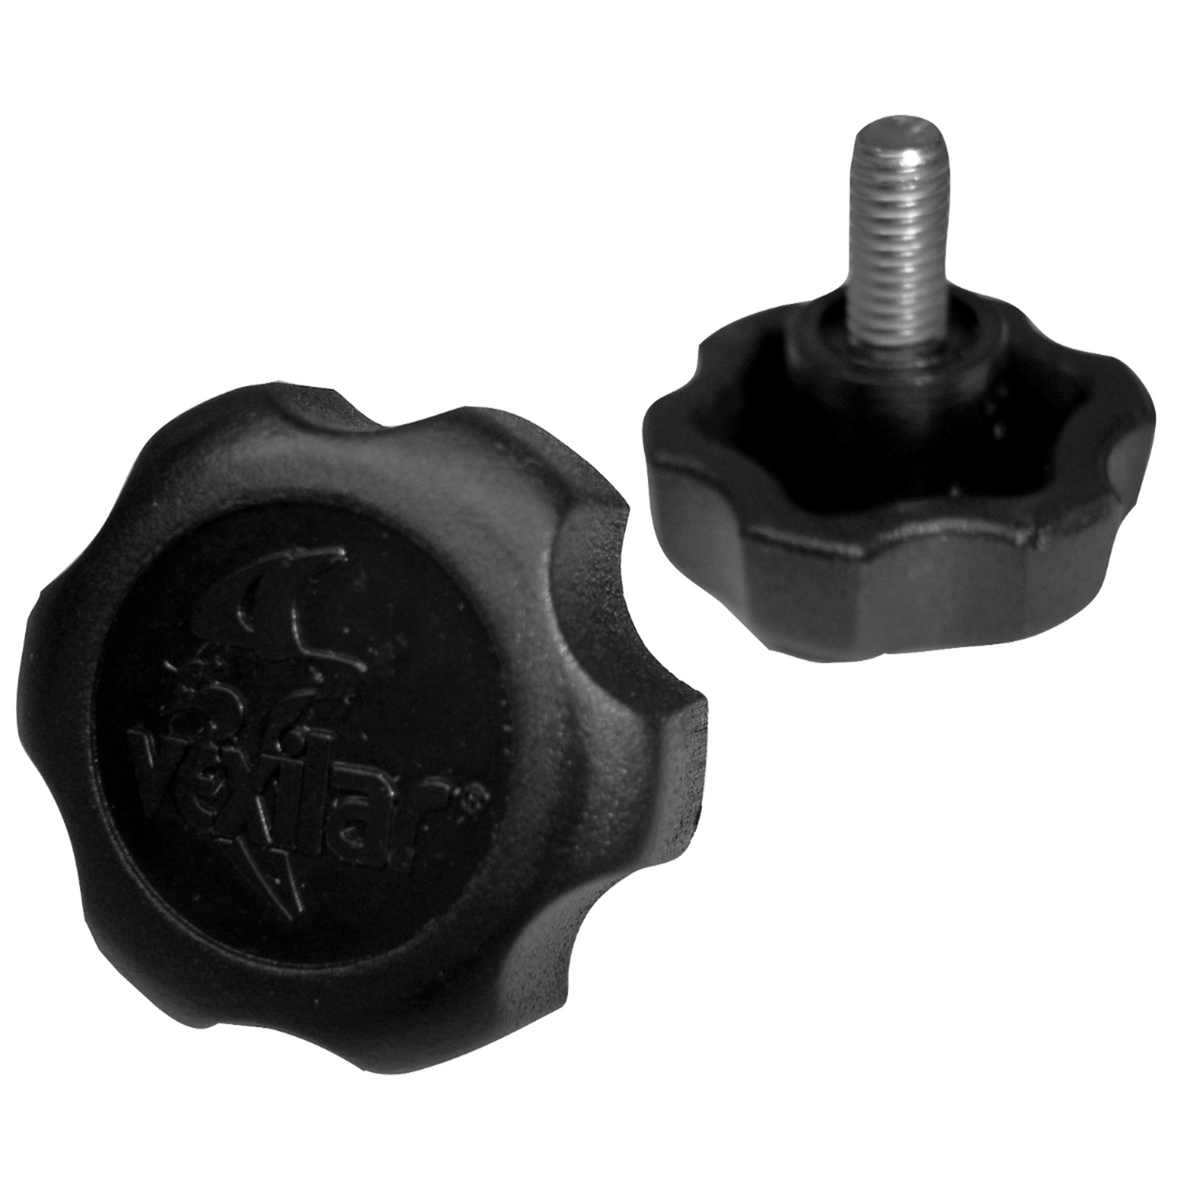 Vexilar Gimbal Knob for all FL series Flashers (2 pack) (8141683969)